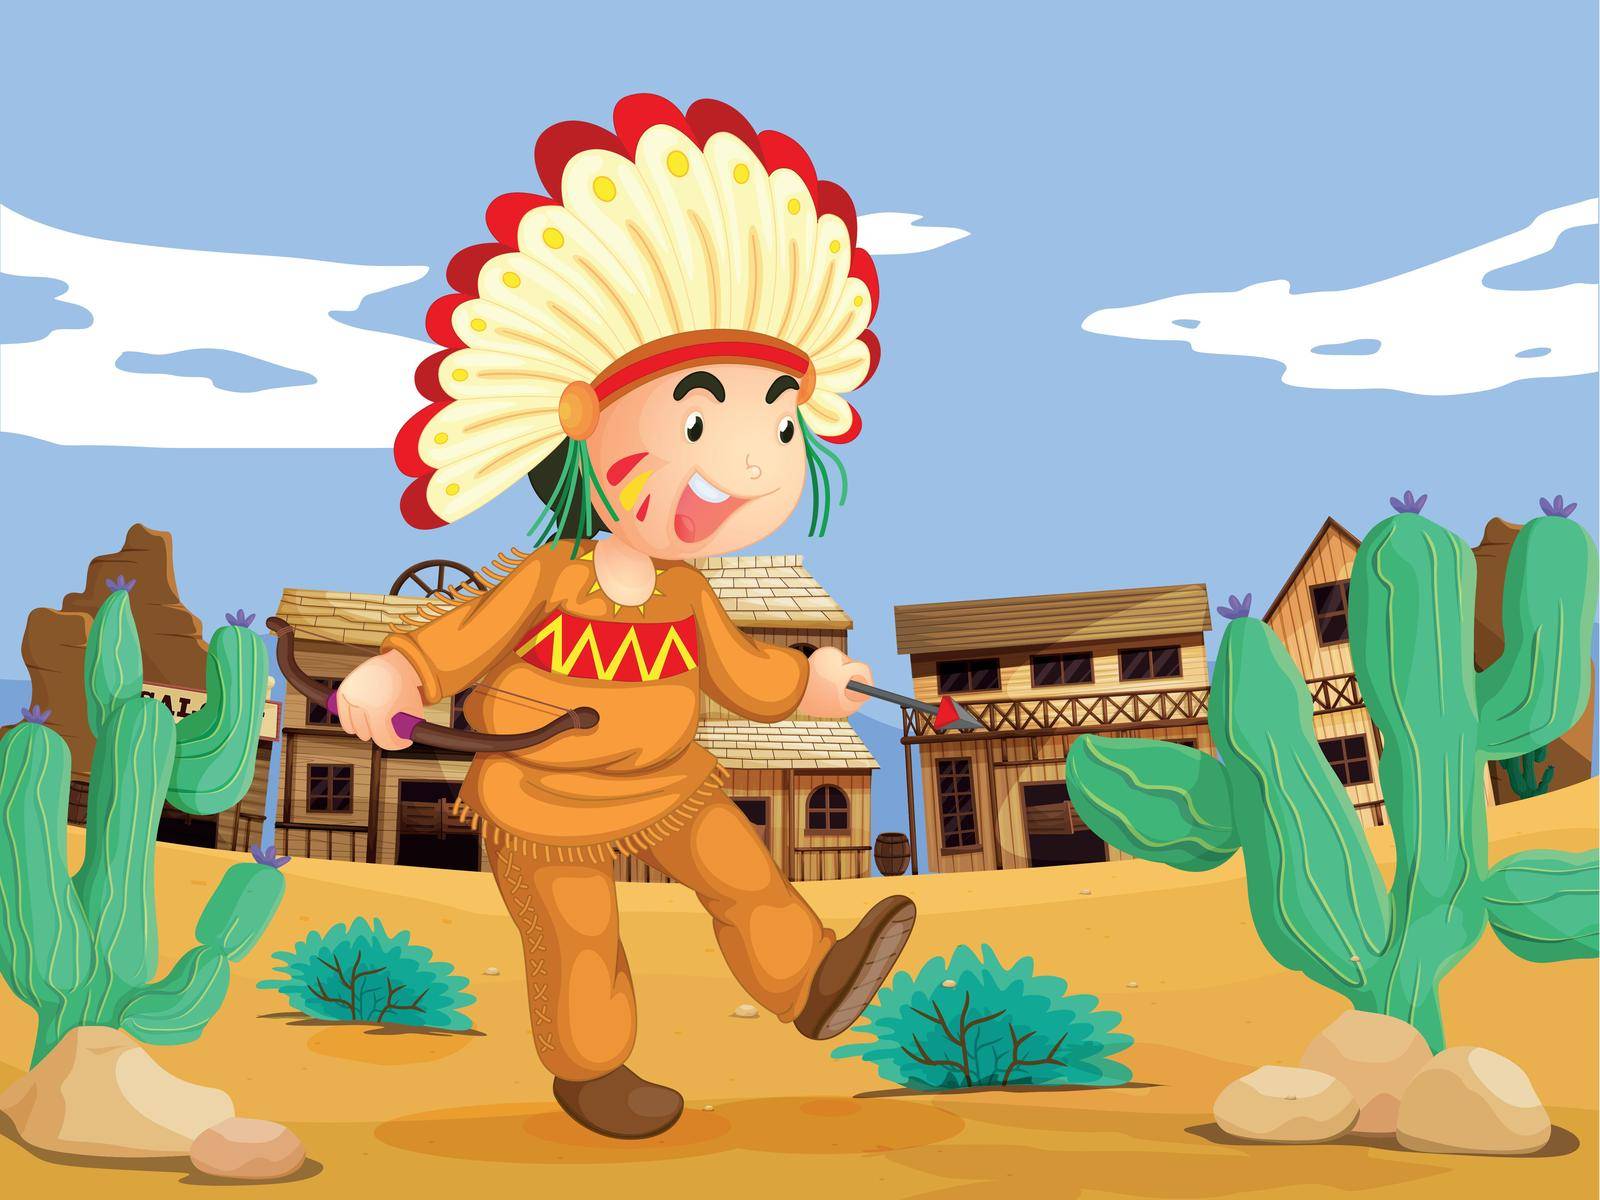 Illustration of an american indian in the wild west